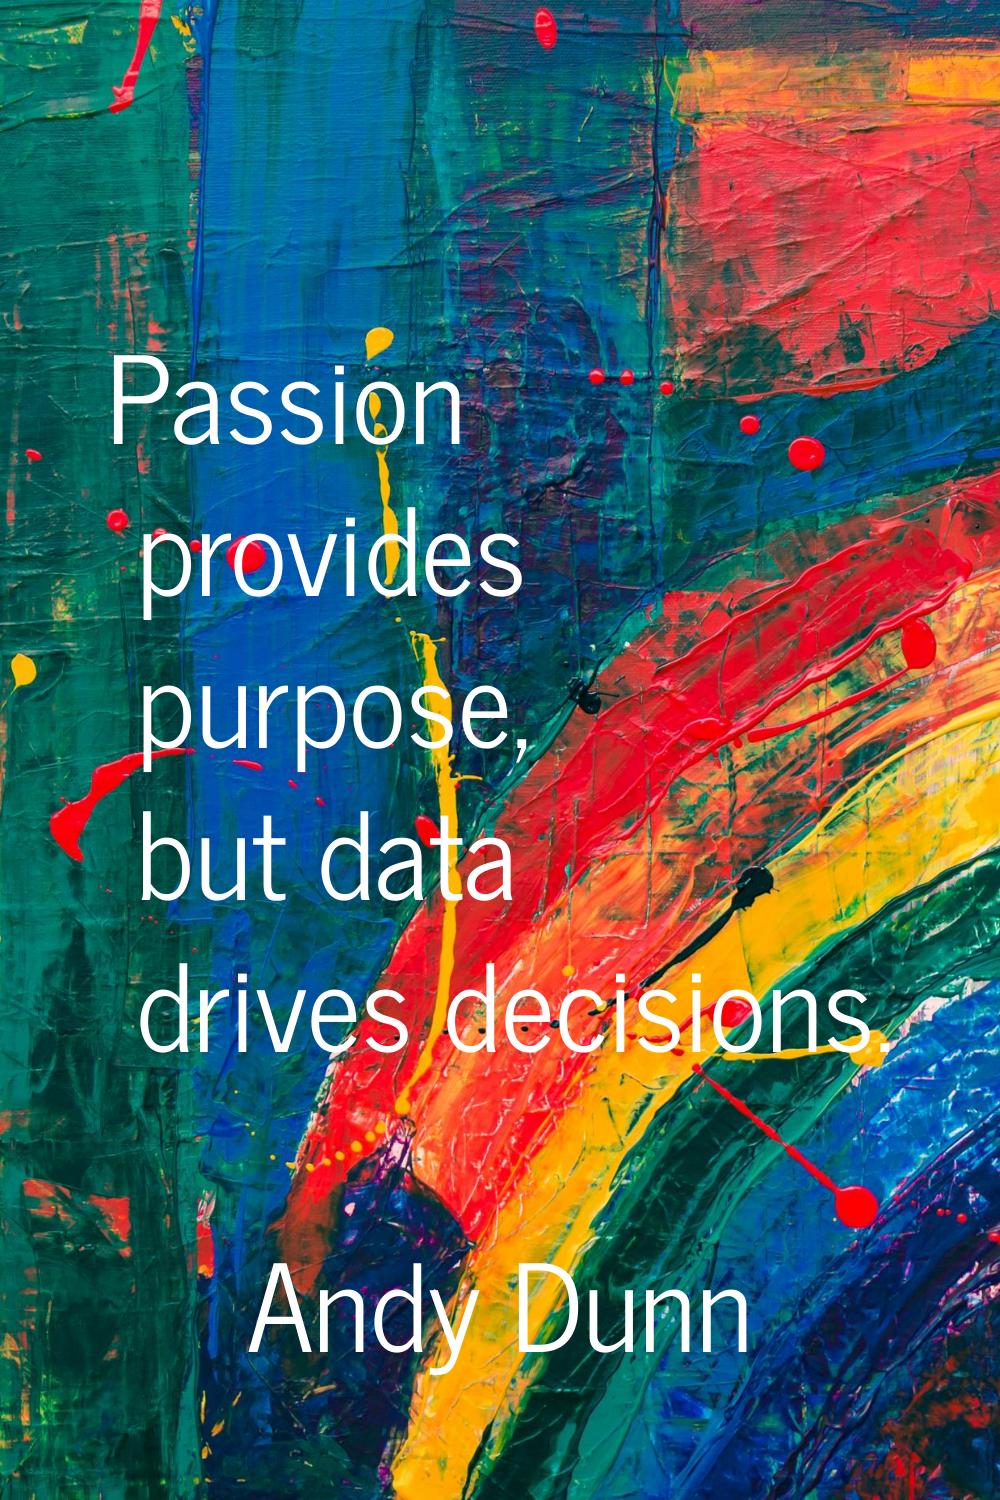 Passion provides purpose, but data drives decisions.